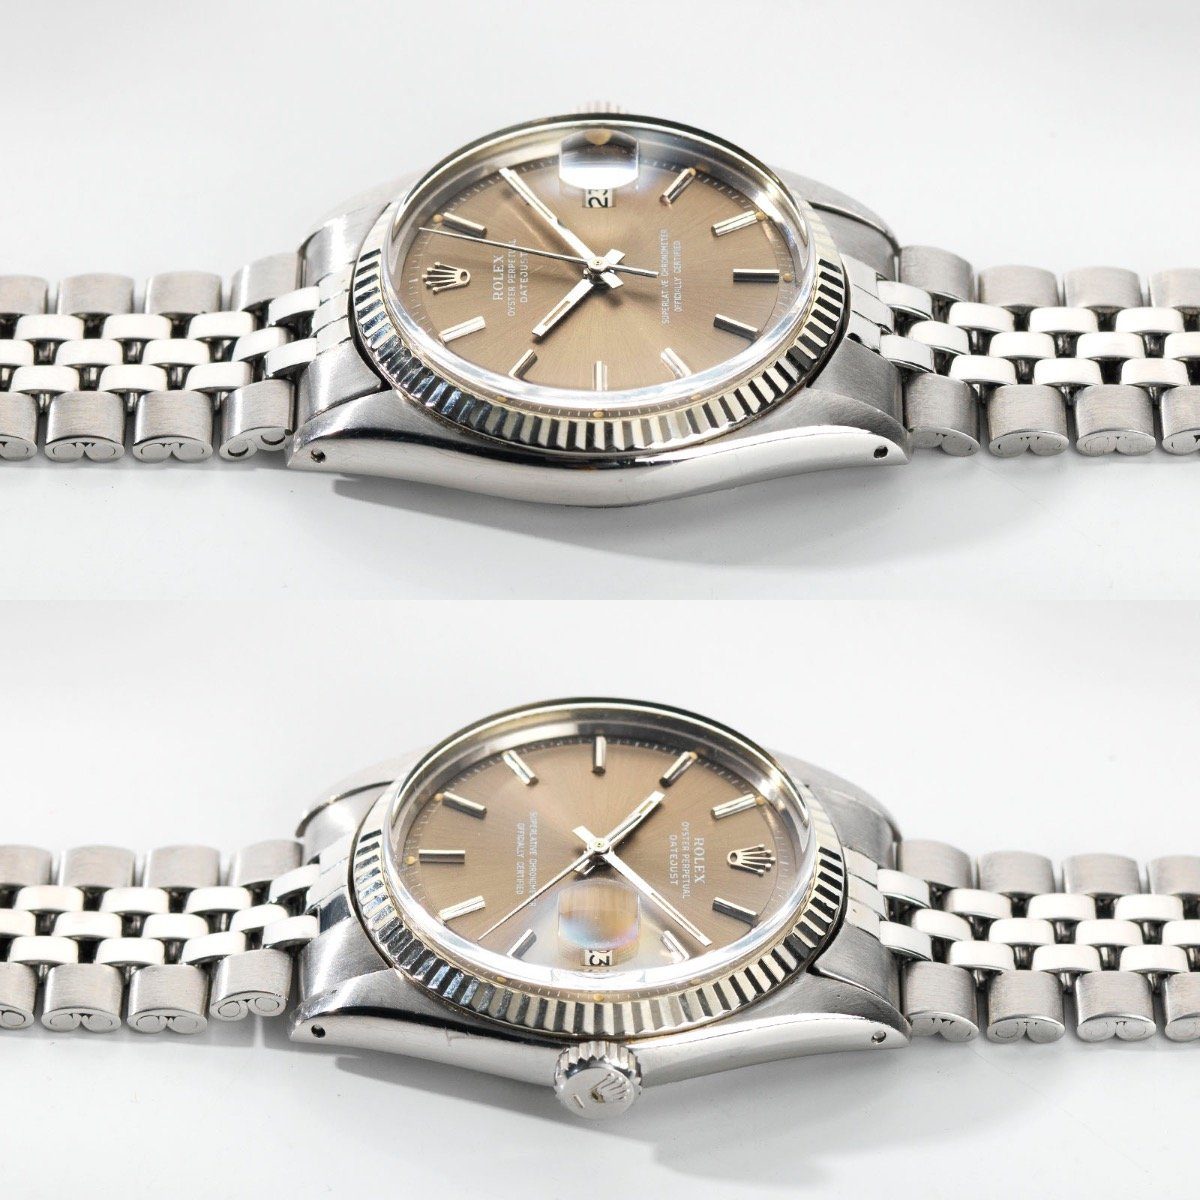 Rolex Datejust Reference 1601 Sigma Dial